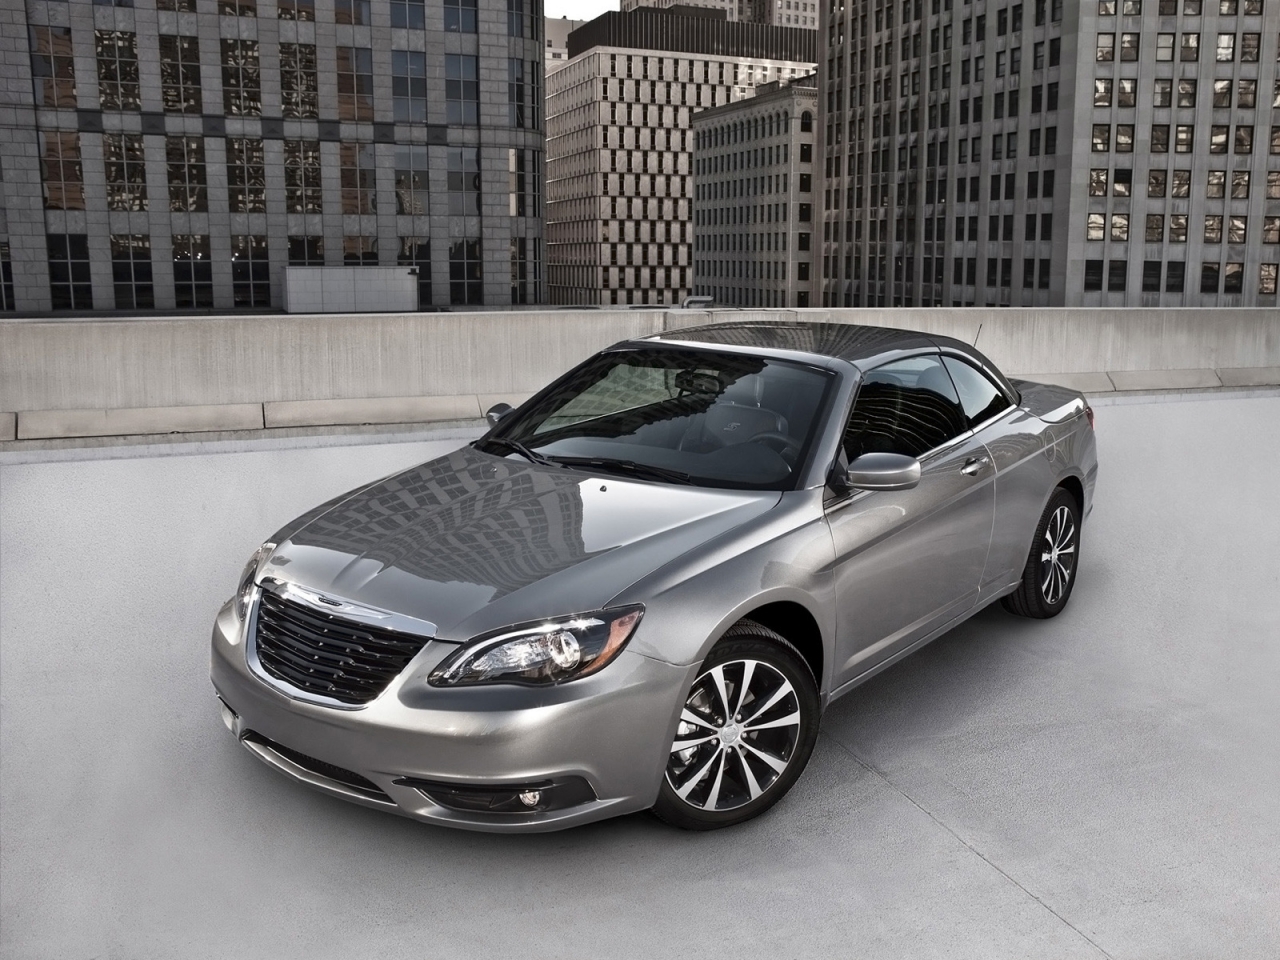 2011 Chrysler 200 S Convertible for 1280 x 960 resolution